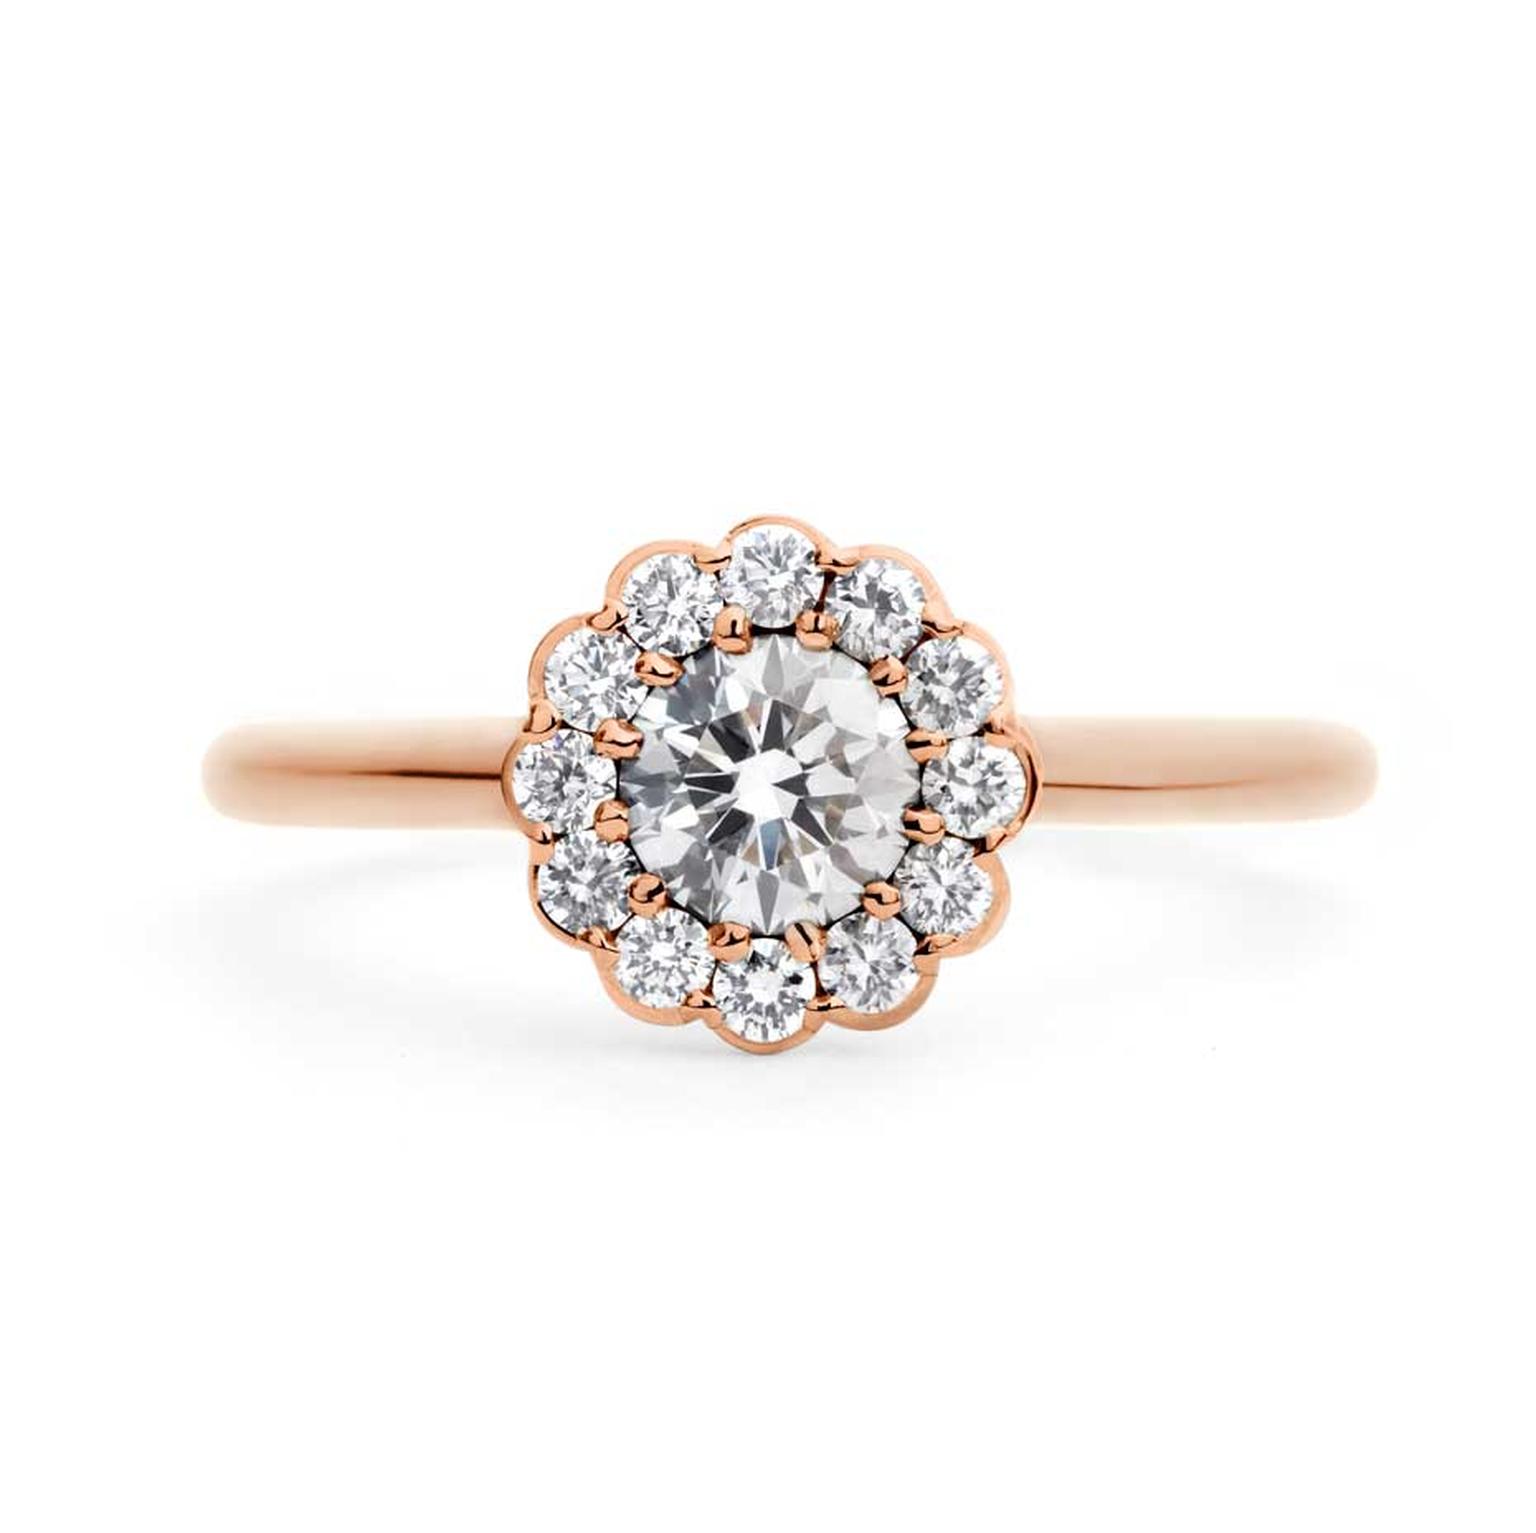 British jeweller Andrew Geoghegan's Cannelé Twist rose gold engagement ring has a vintage feel.